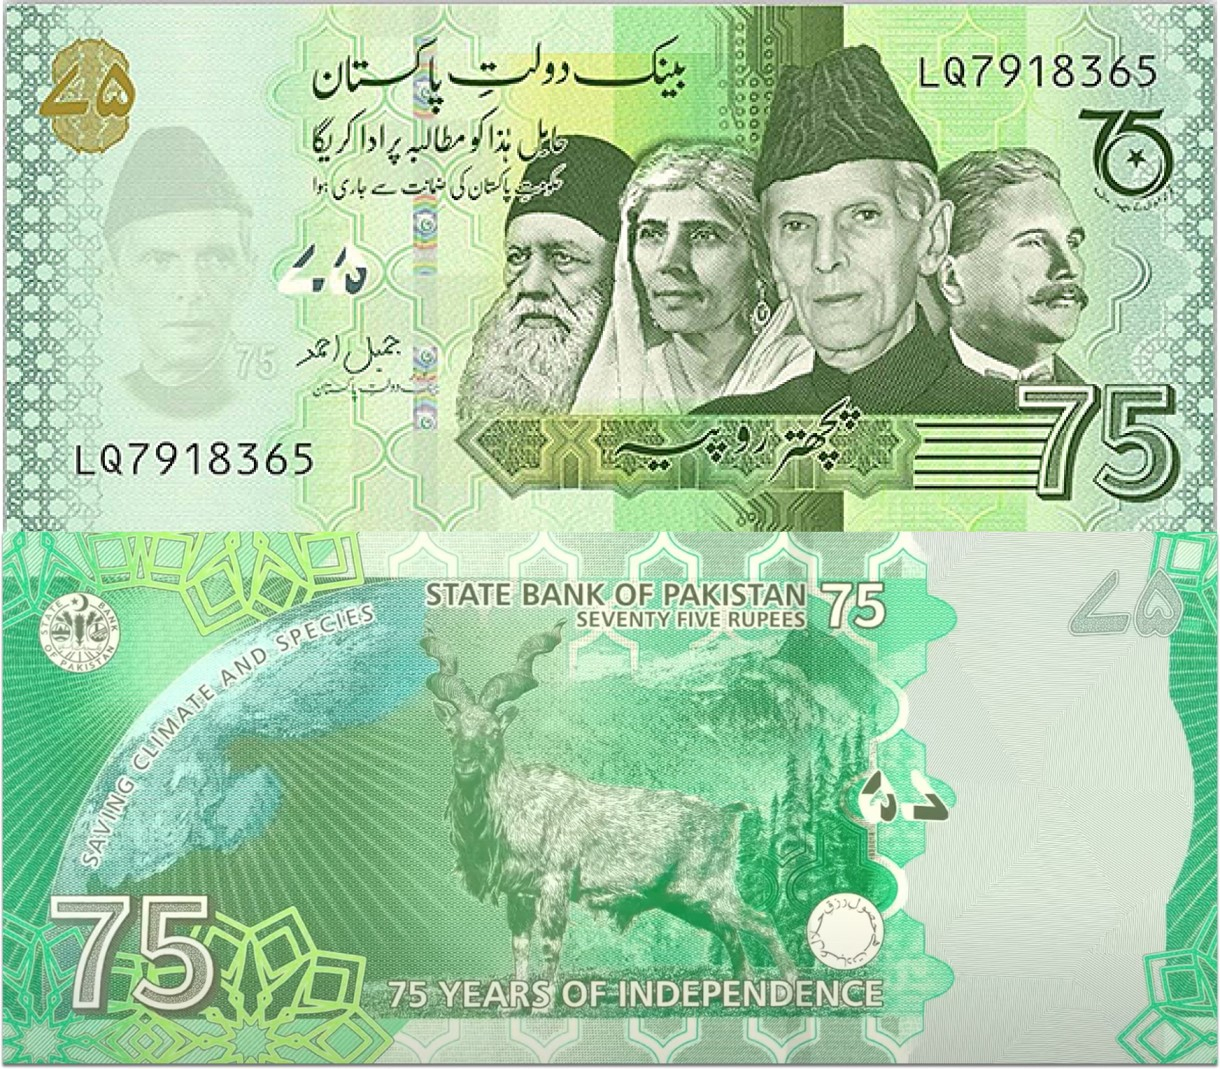 (SBP) State Bank of Pakistan has issued an Rs.75 memorial Note